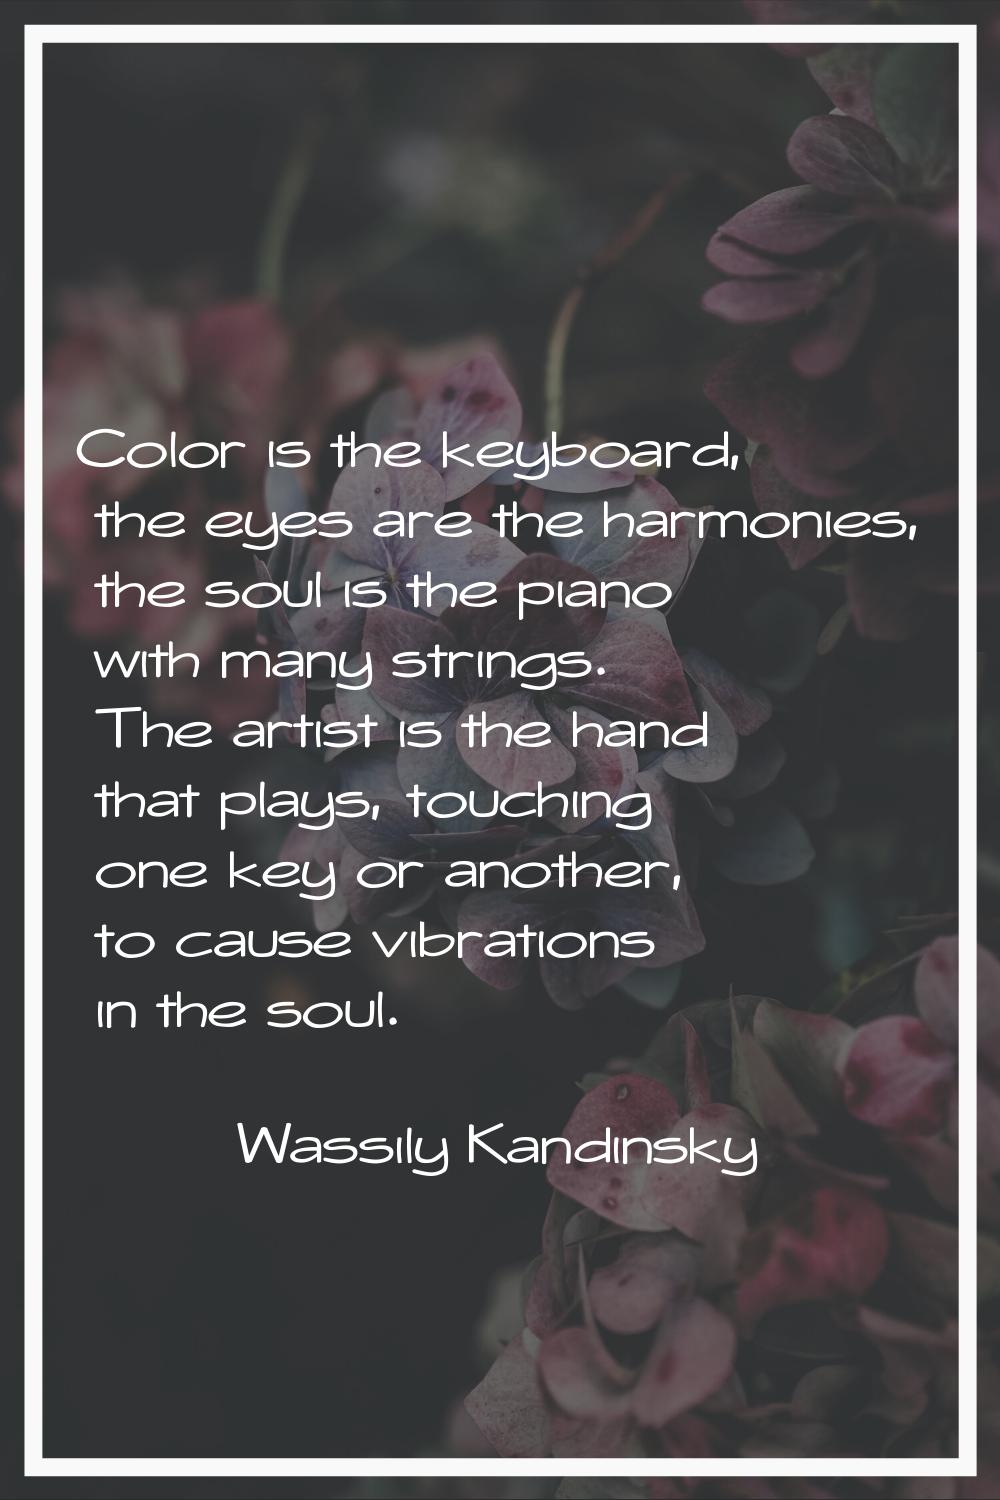 Color is the keyboard, the eyes are the harmonies, the soul is the piano with many strings. The art